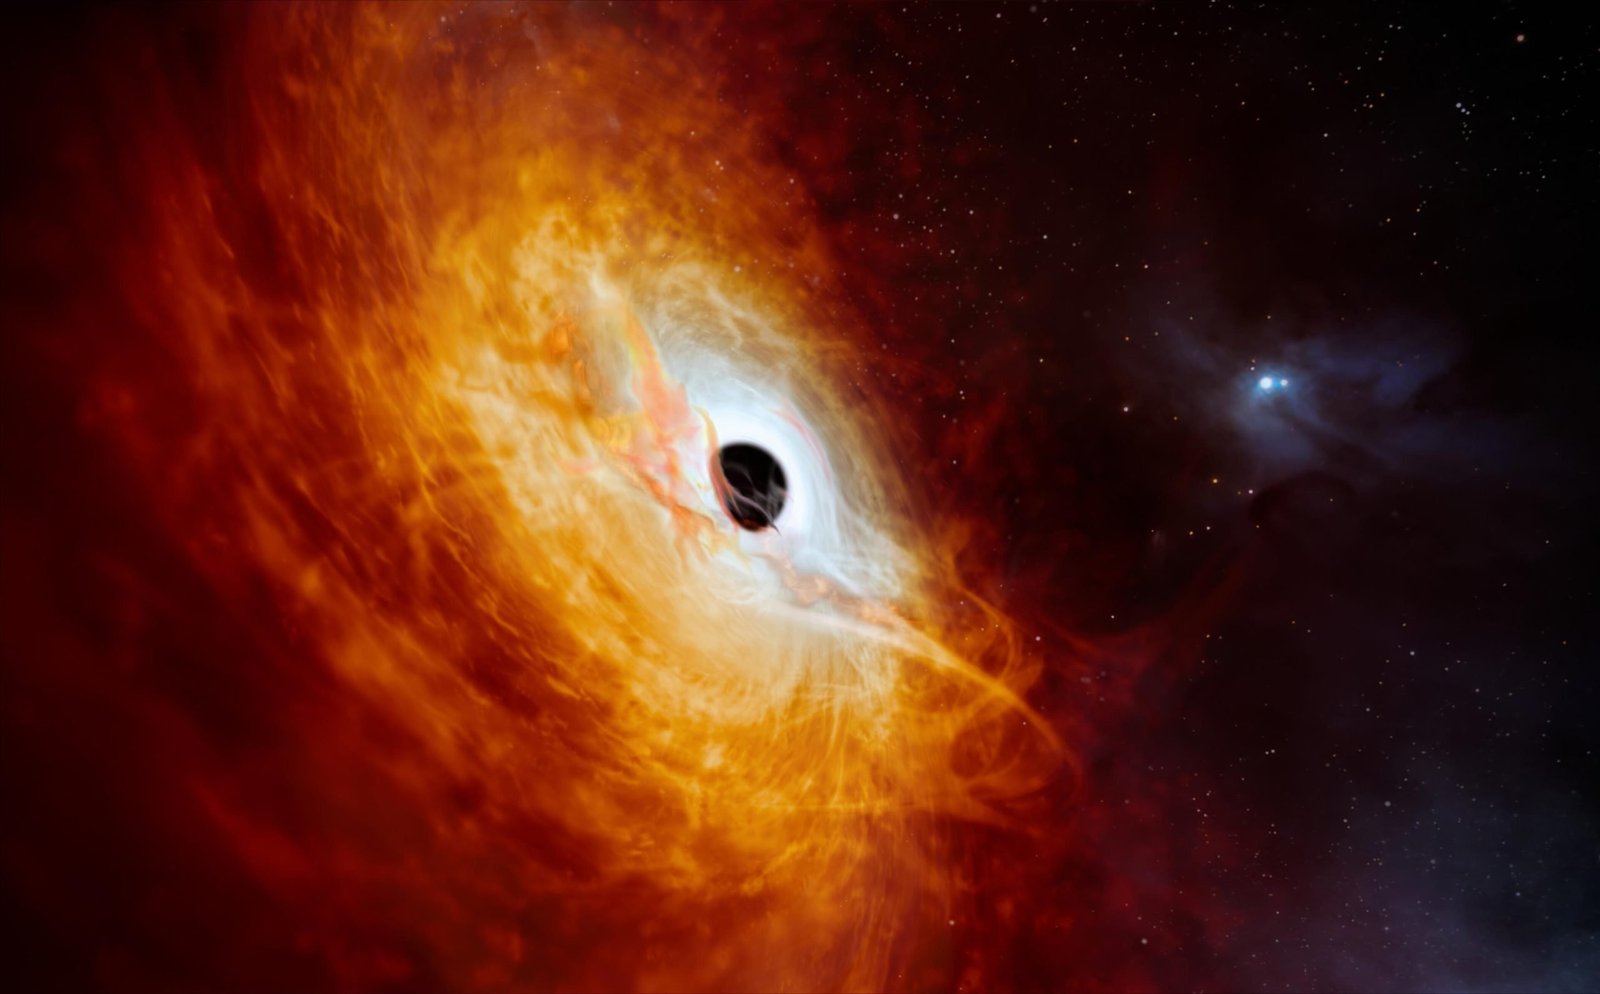 Brightest Object in the Universe Discovered – Powered by Supermassive Black Hole Eating a Sun a Day